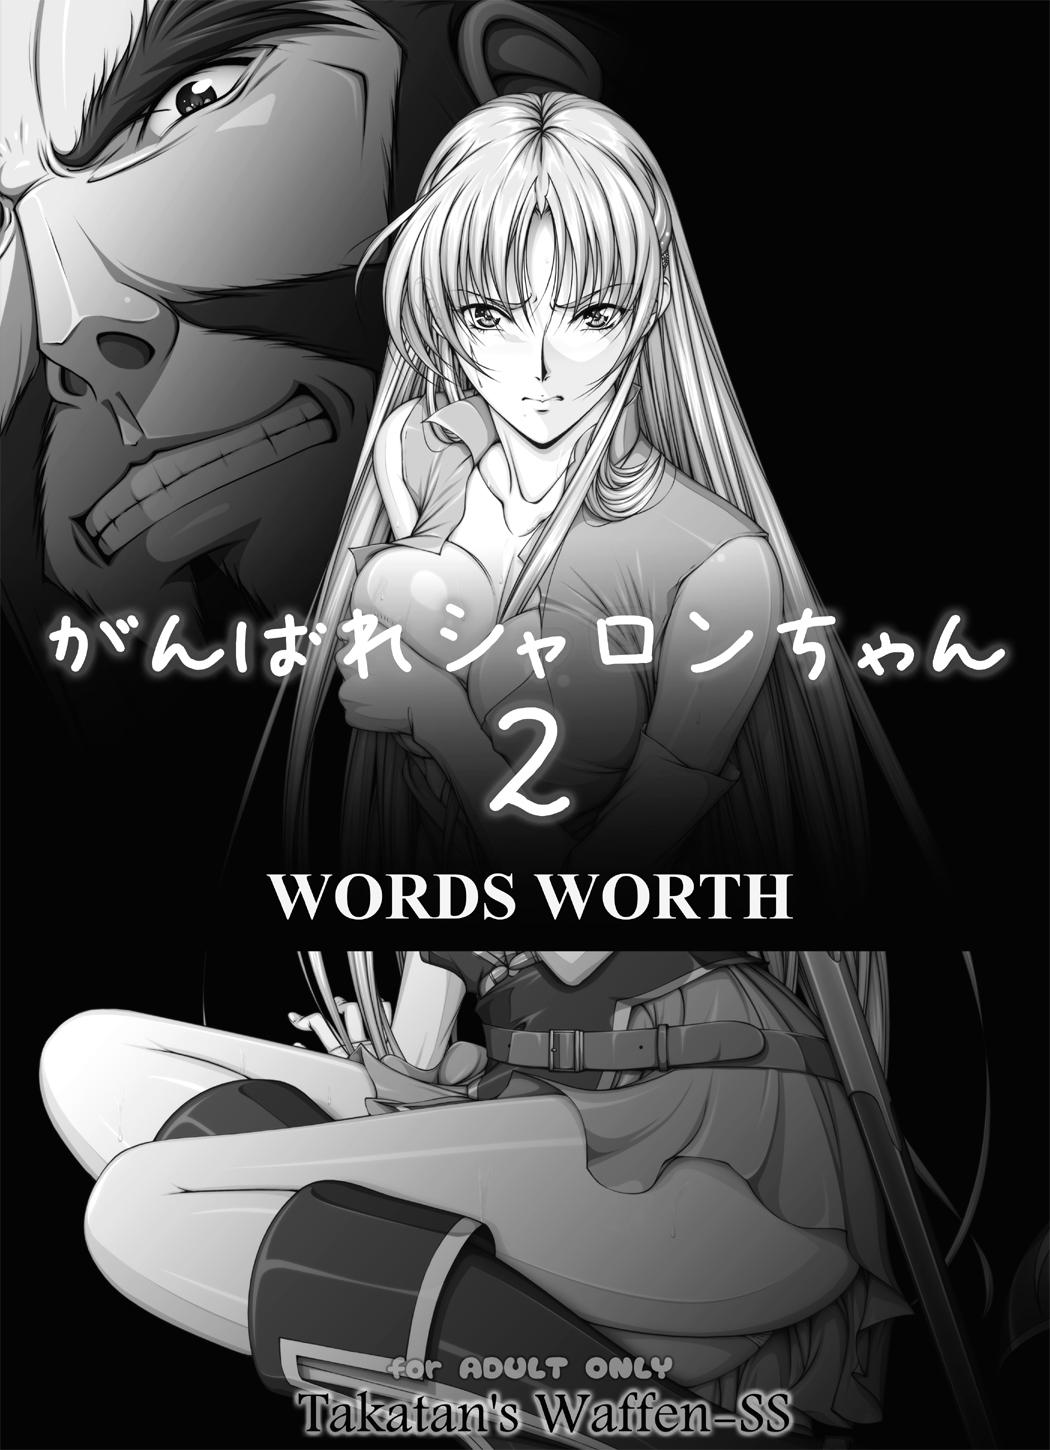 HD [Takatan's Waffen-SS] Fight, Sharon! 2 [Deluxe Edition] (Words Worth) +omake - Words worth Pussysex - Page 8